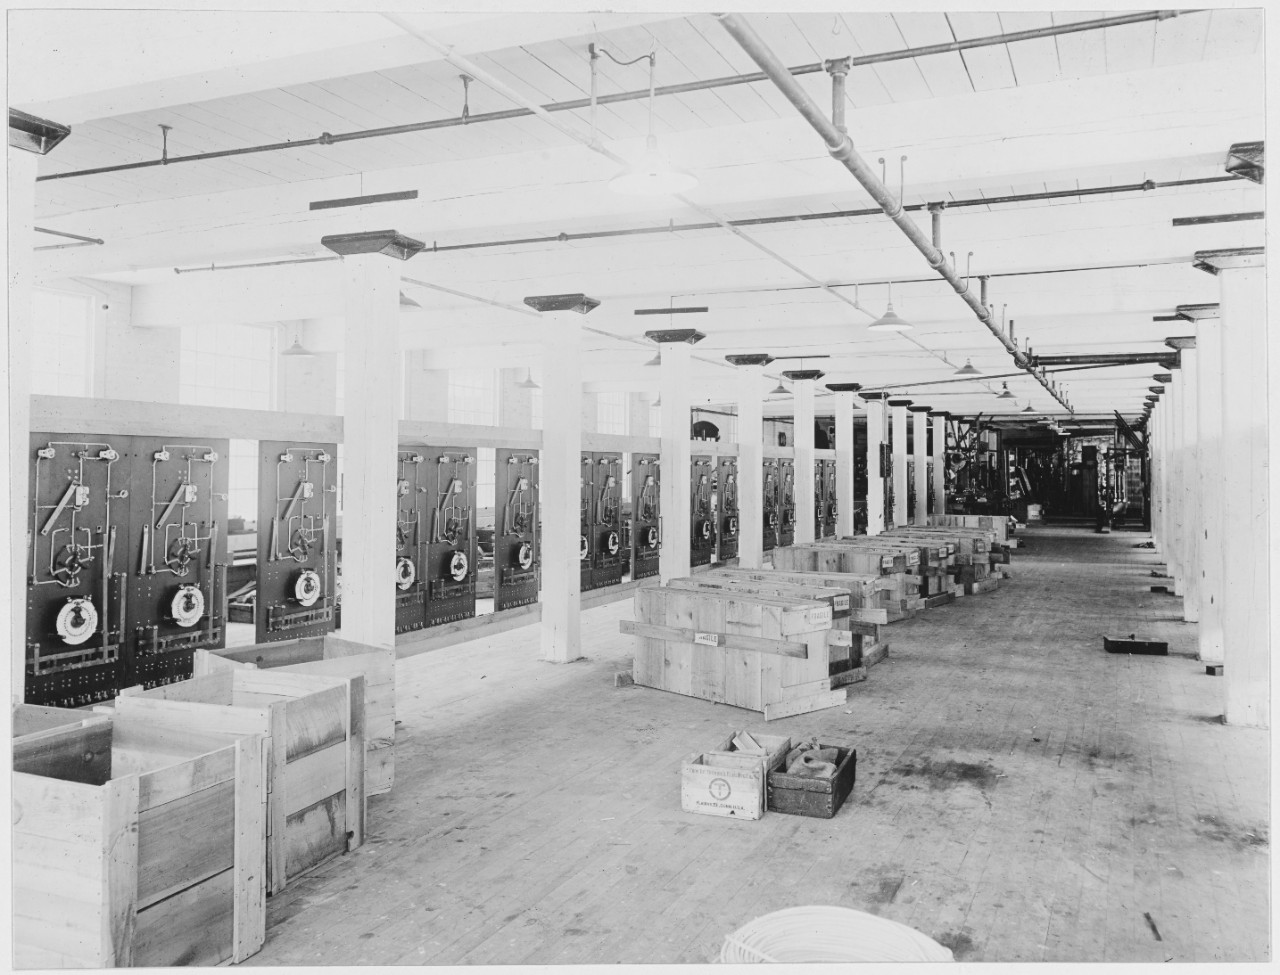 Rear of switchboards - The Trumbull Electric Mfg. Co., Plainville, Connecticut.